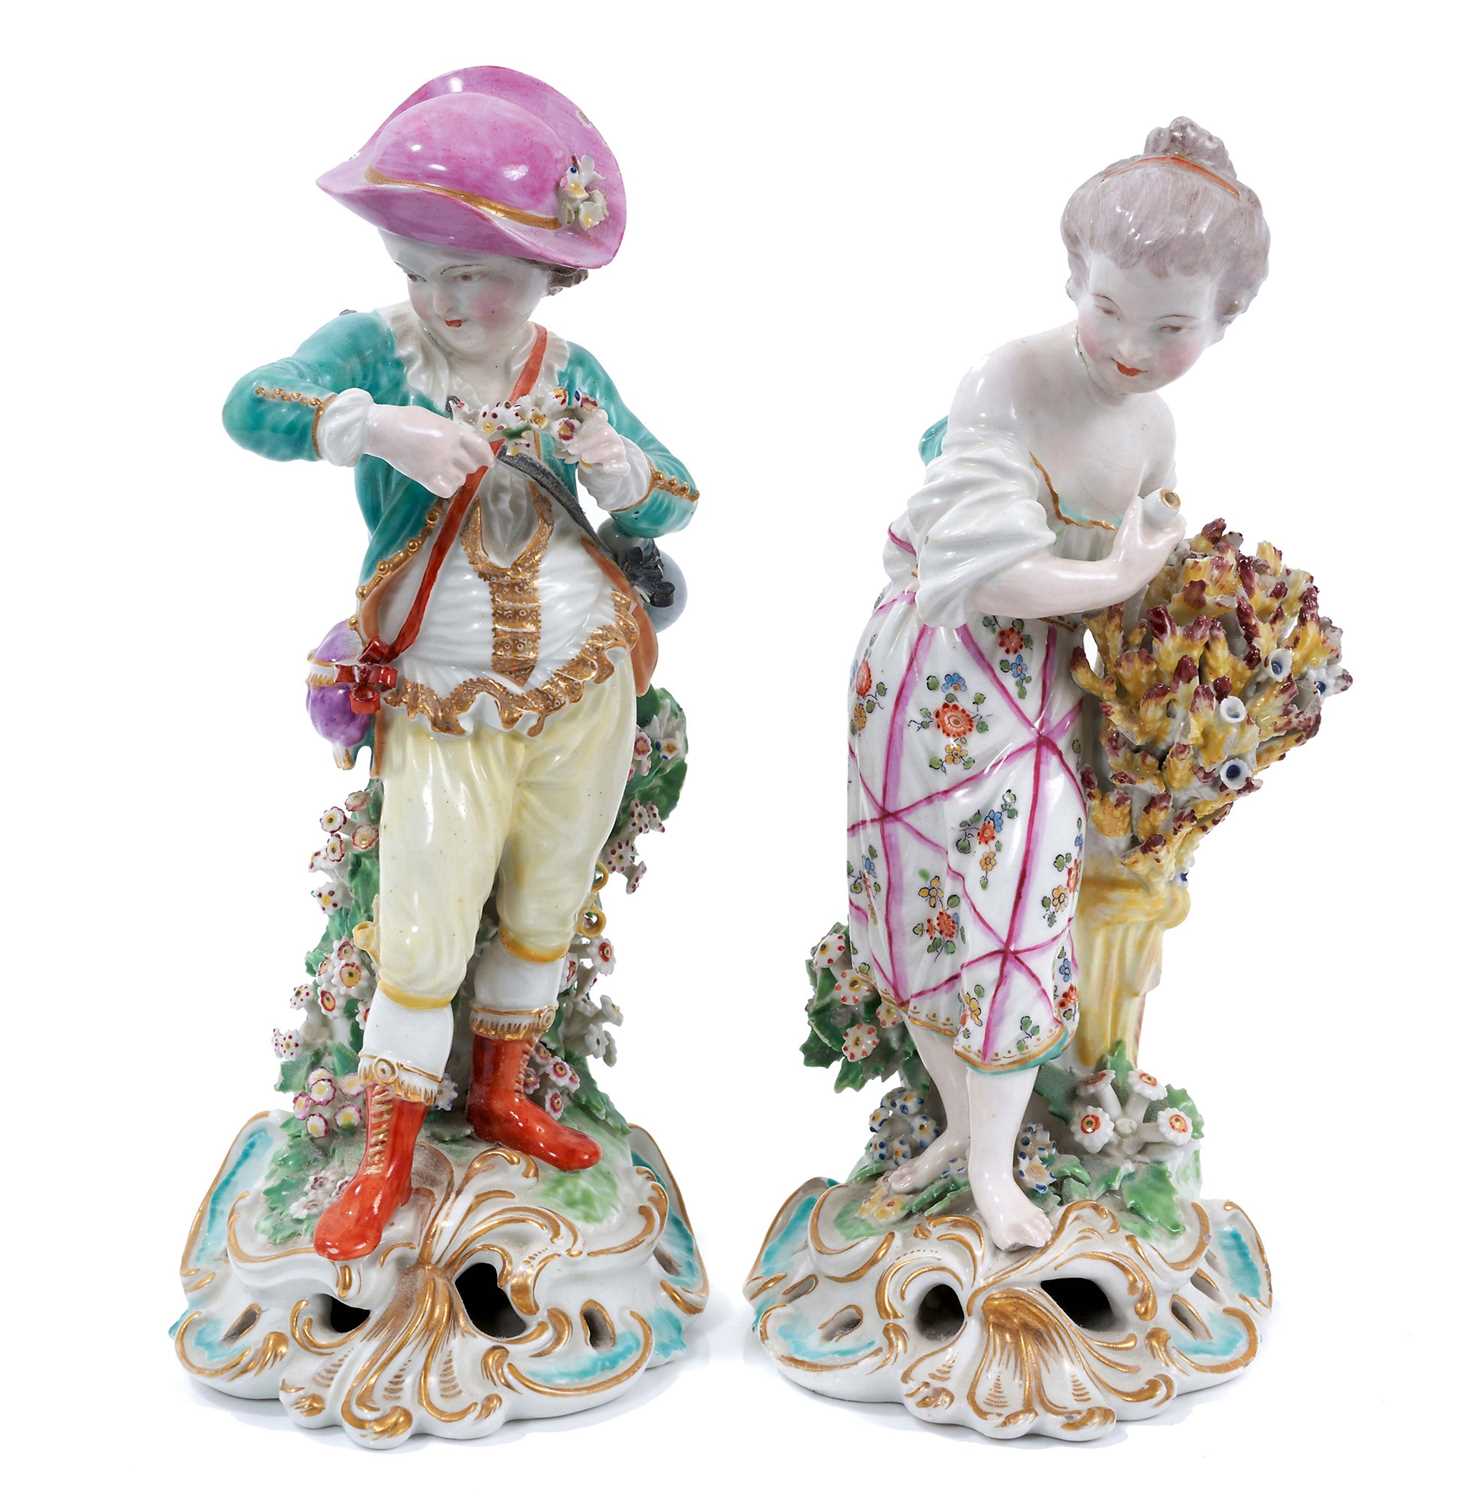 Lot 12 - Two late 18th century Derby figures, emblematic of Spring and Summer, polychrome decorated and standing on scrollwork bases, 22.5cm and 23.5cm high